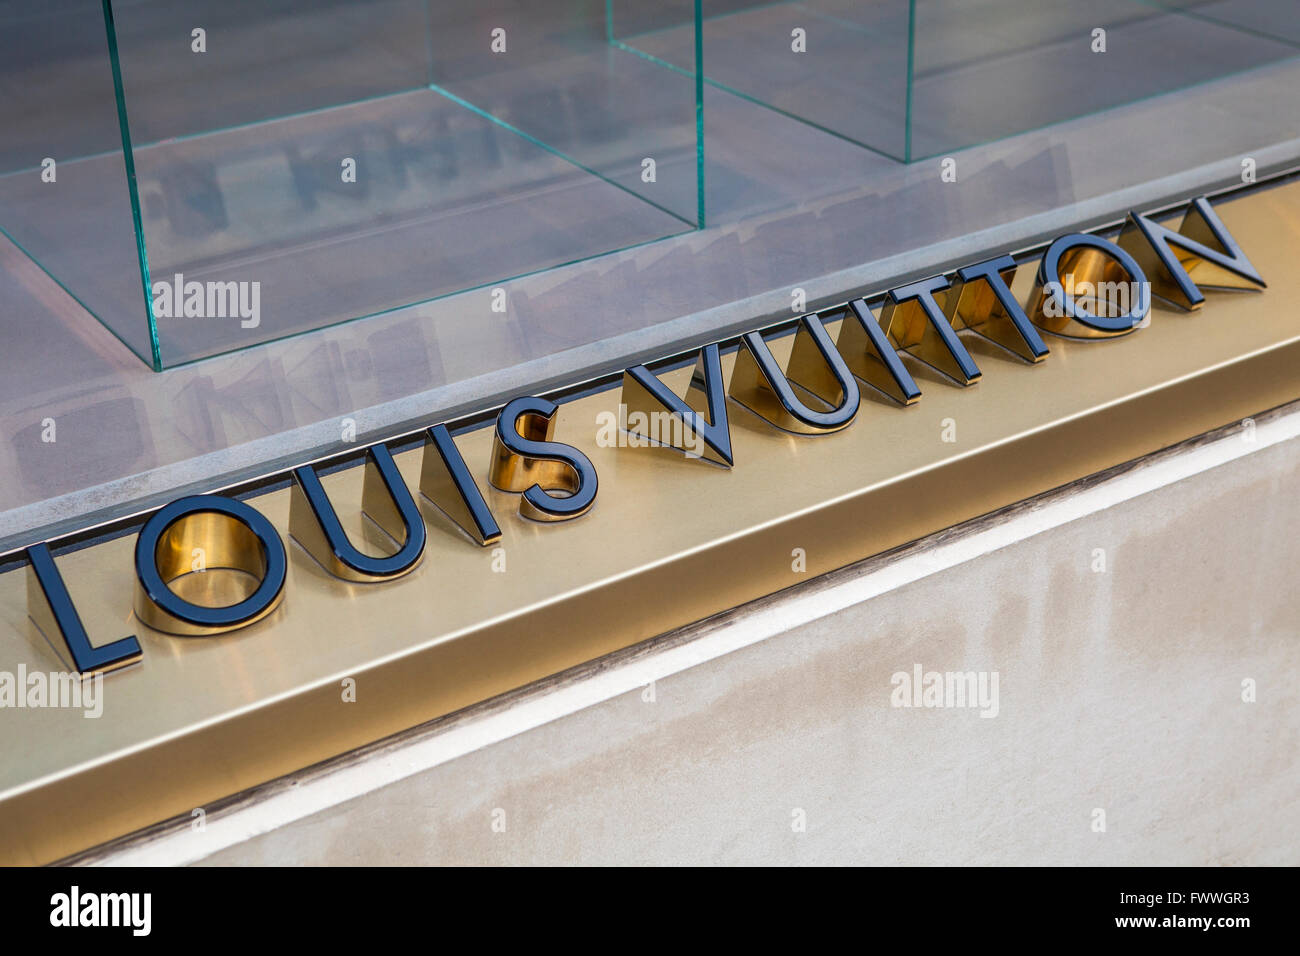 Louis Vuitton Store Sign. Chic Fashion Wall Art. Metal LV Designer Sign –  Print and Proper®